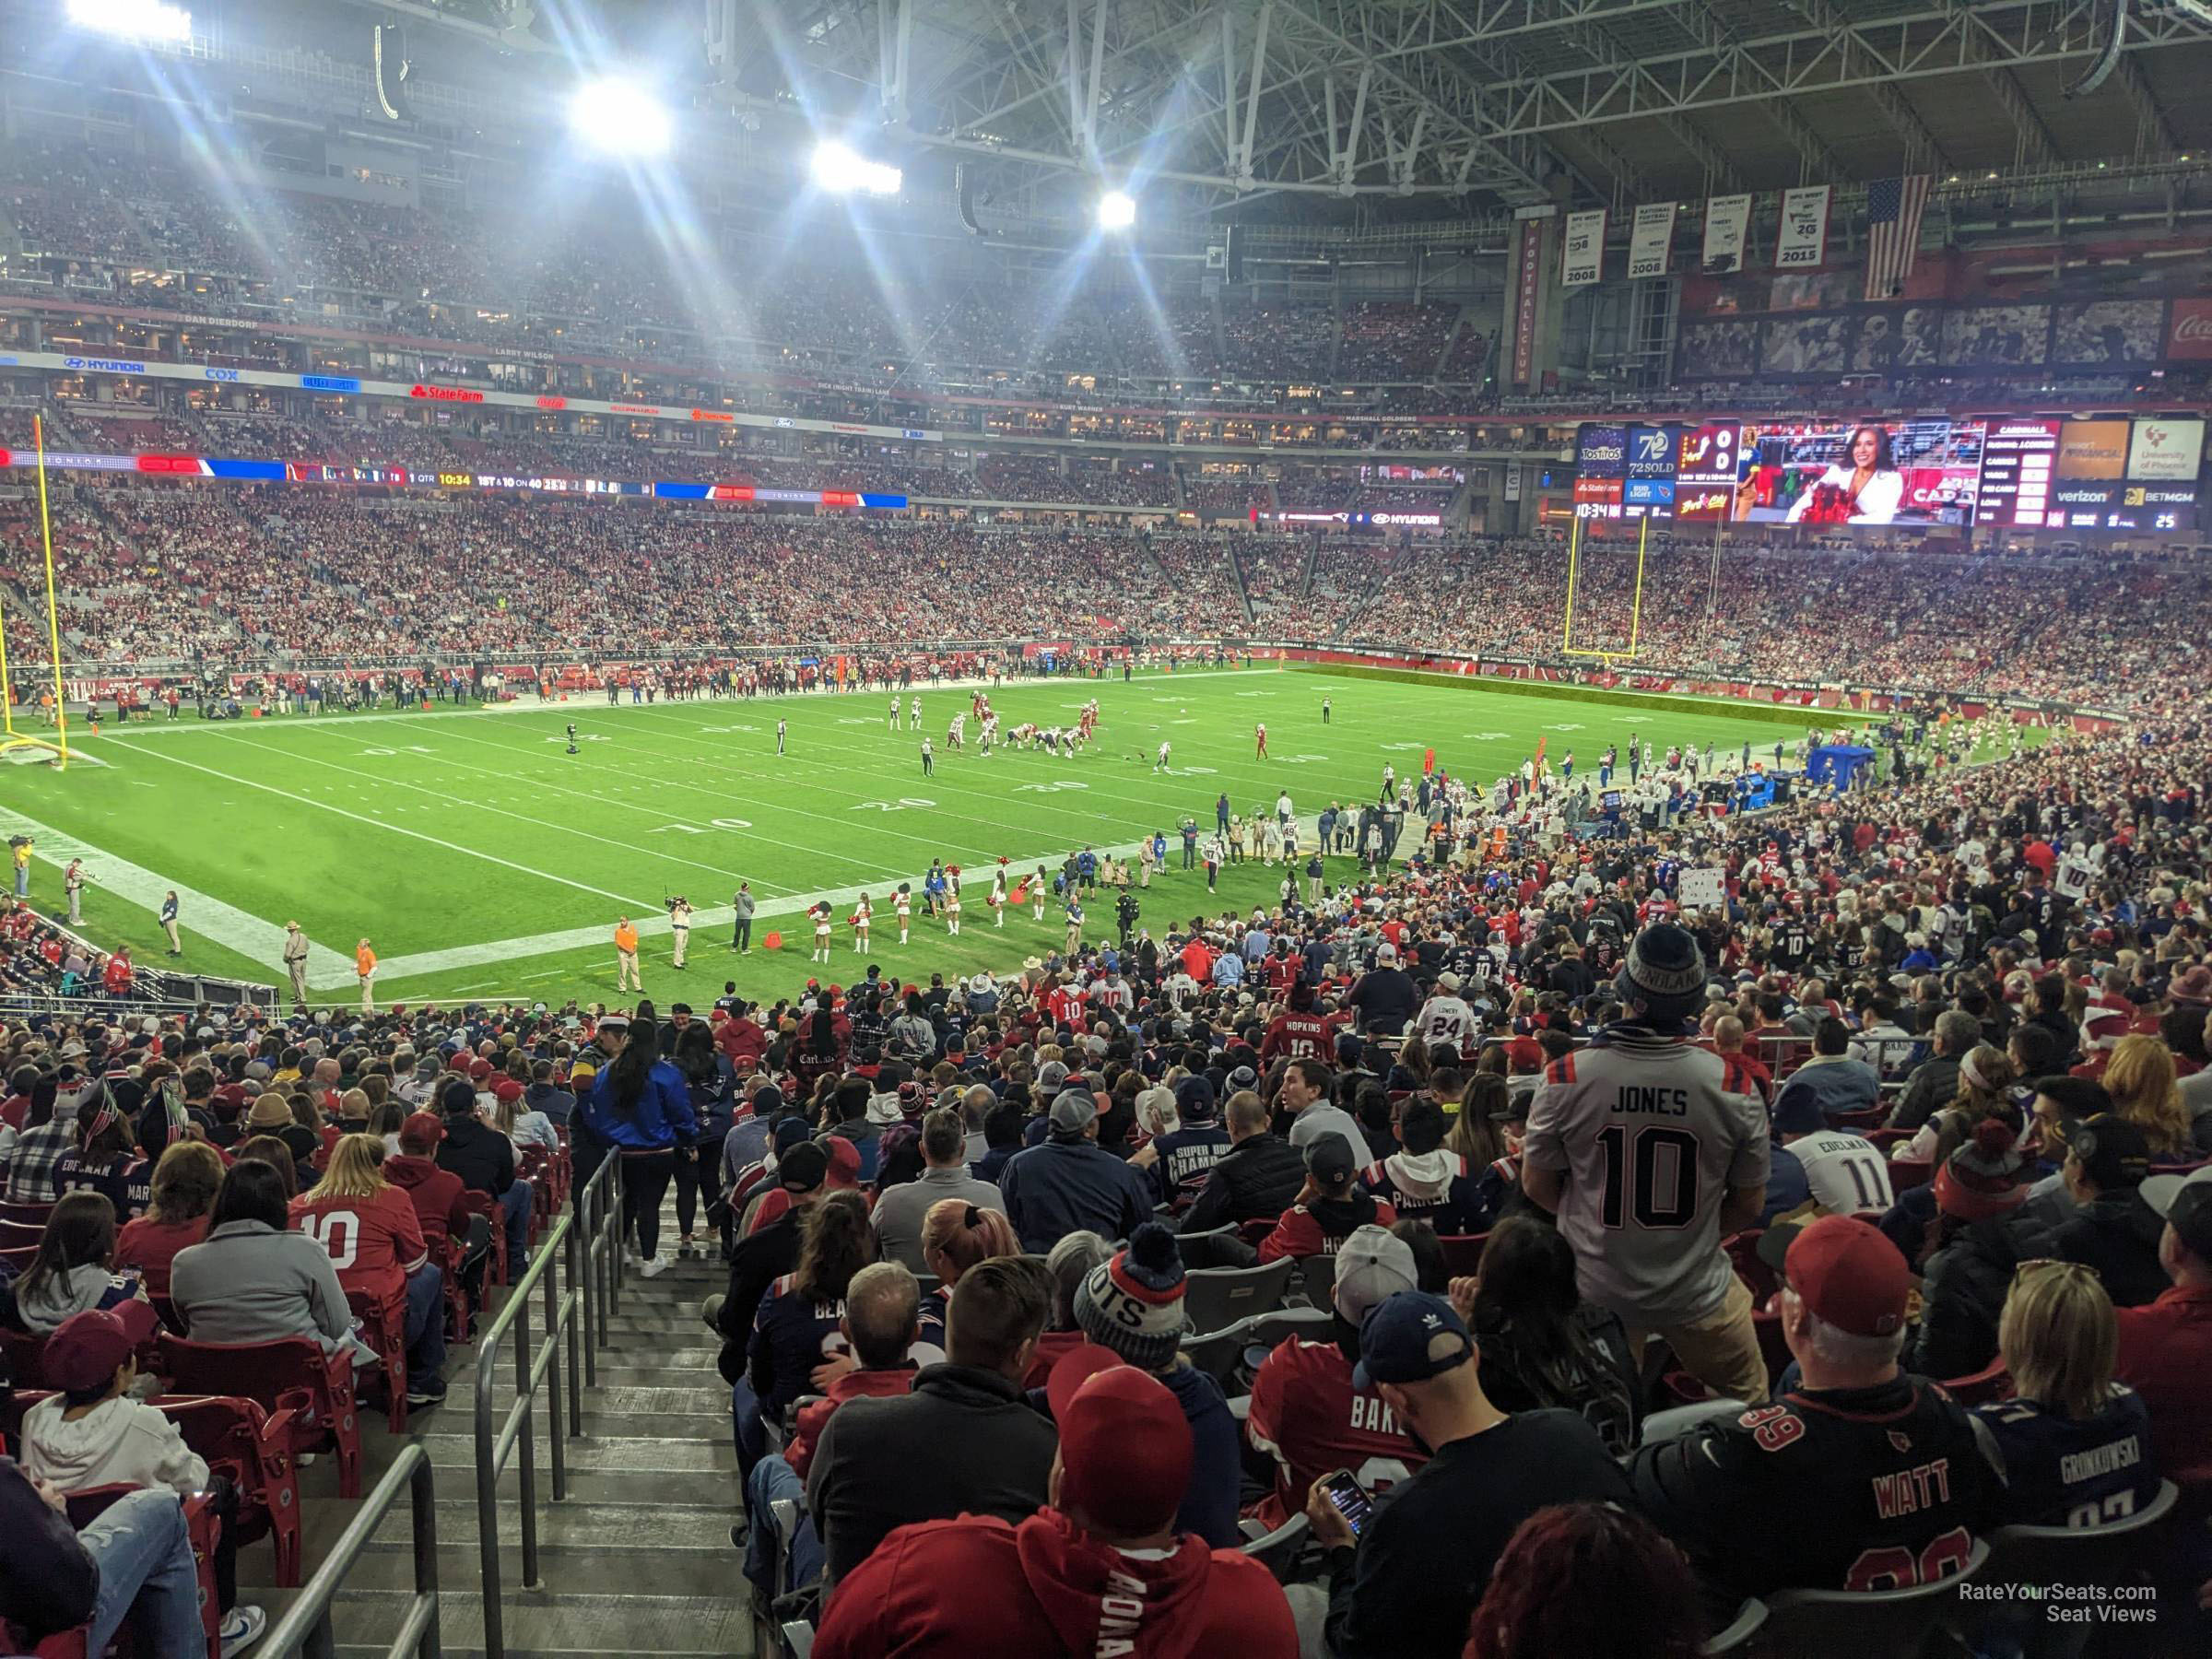 section 135, row 41 seat view  for football - state farm stadium